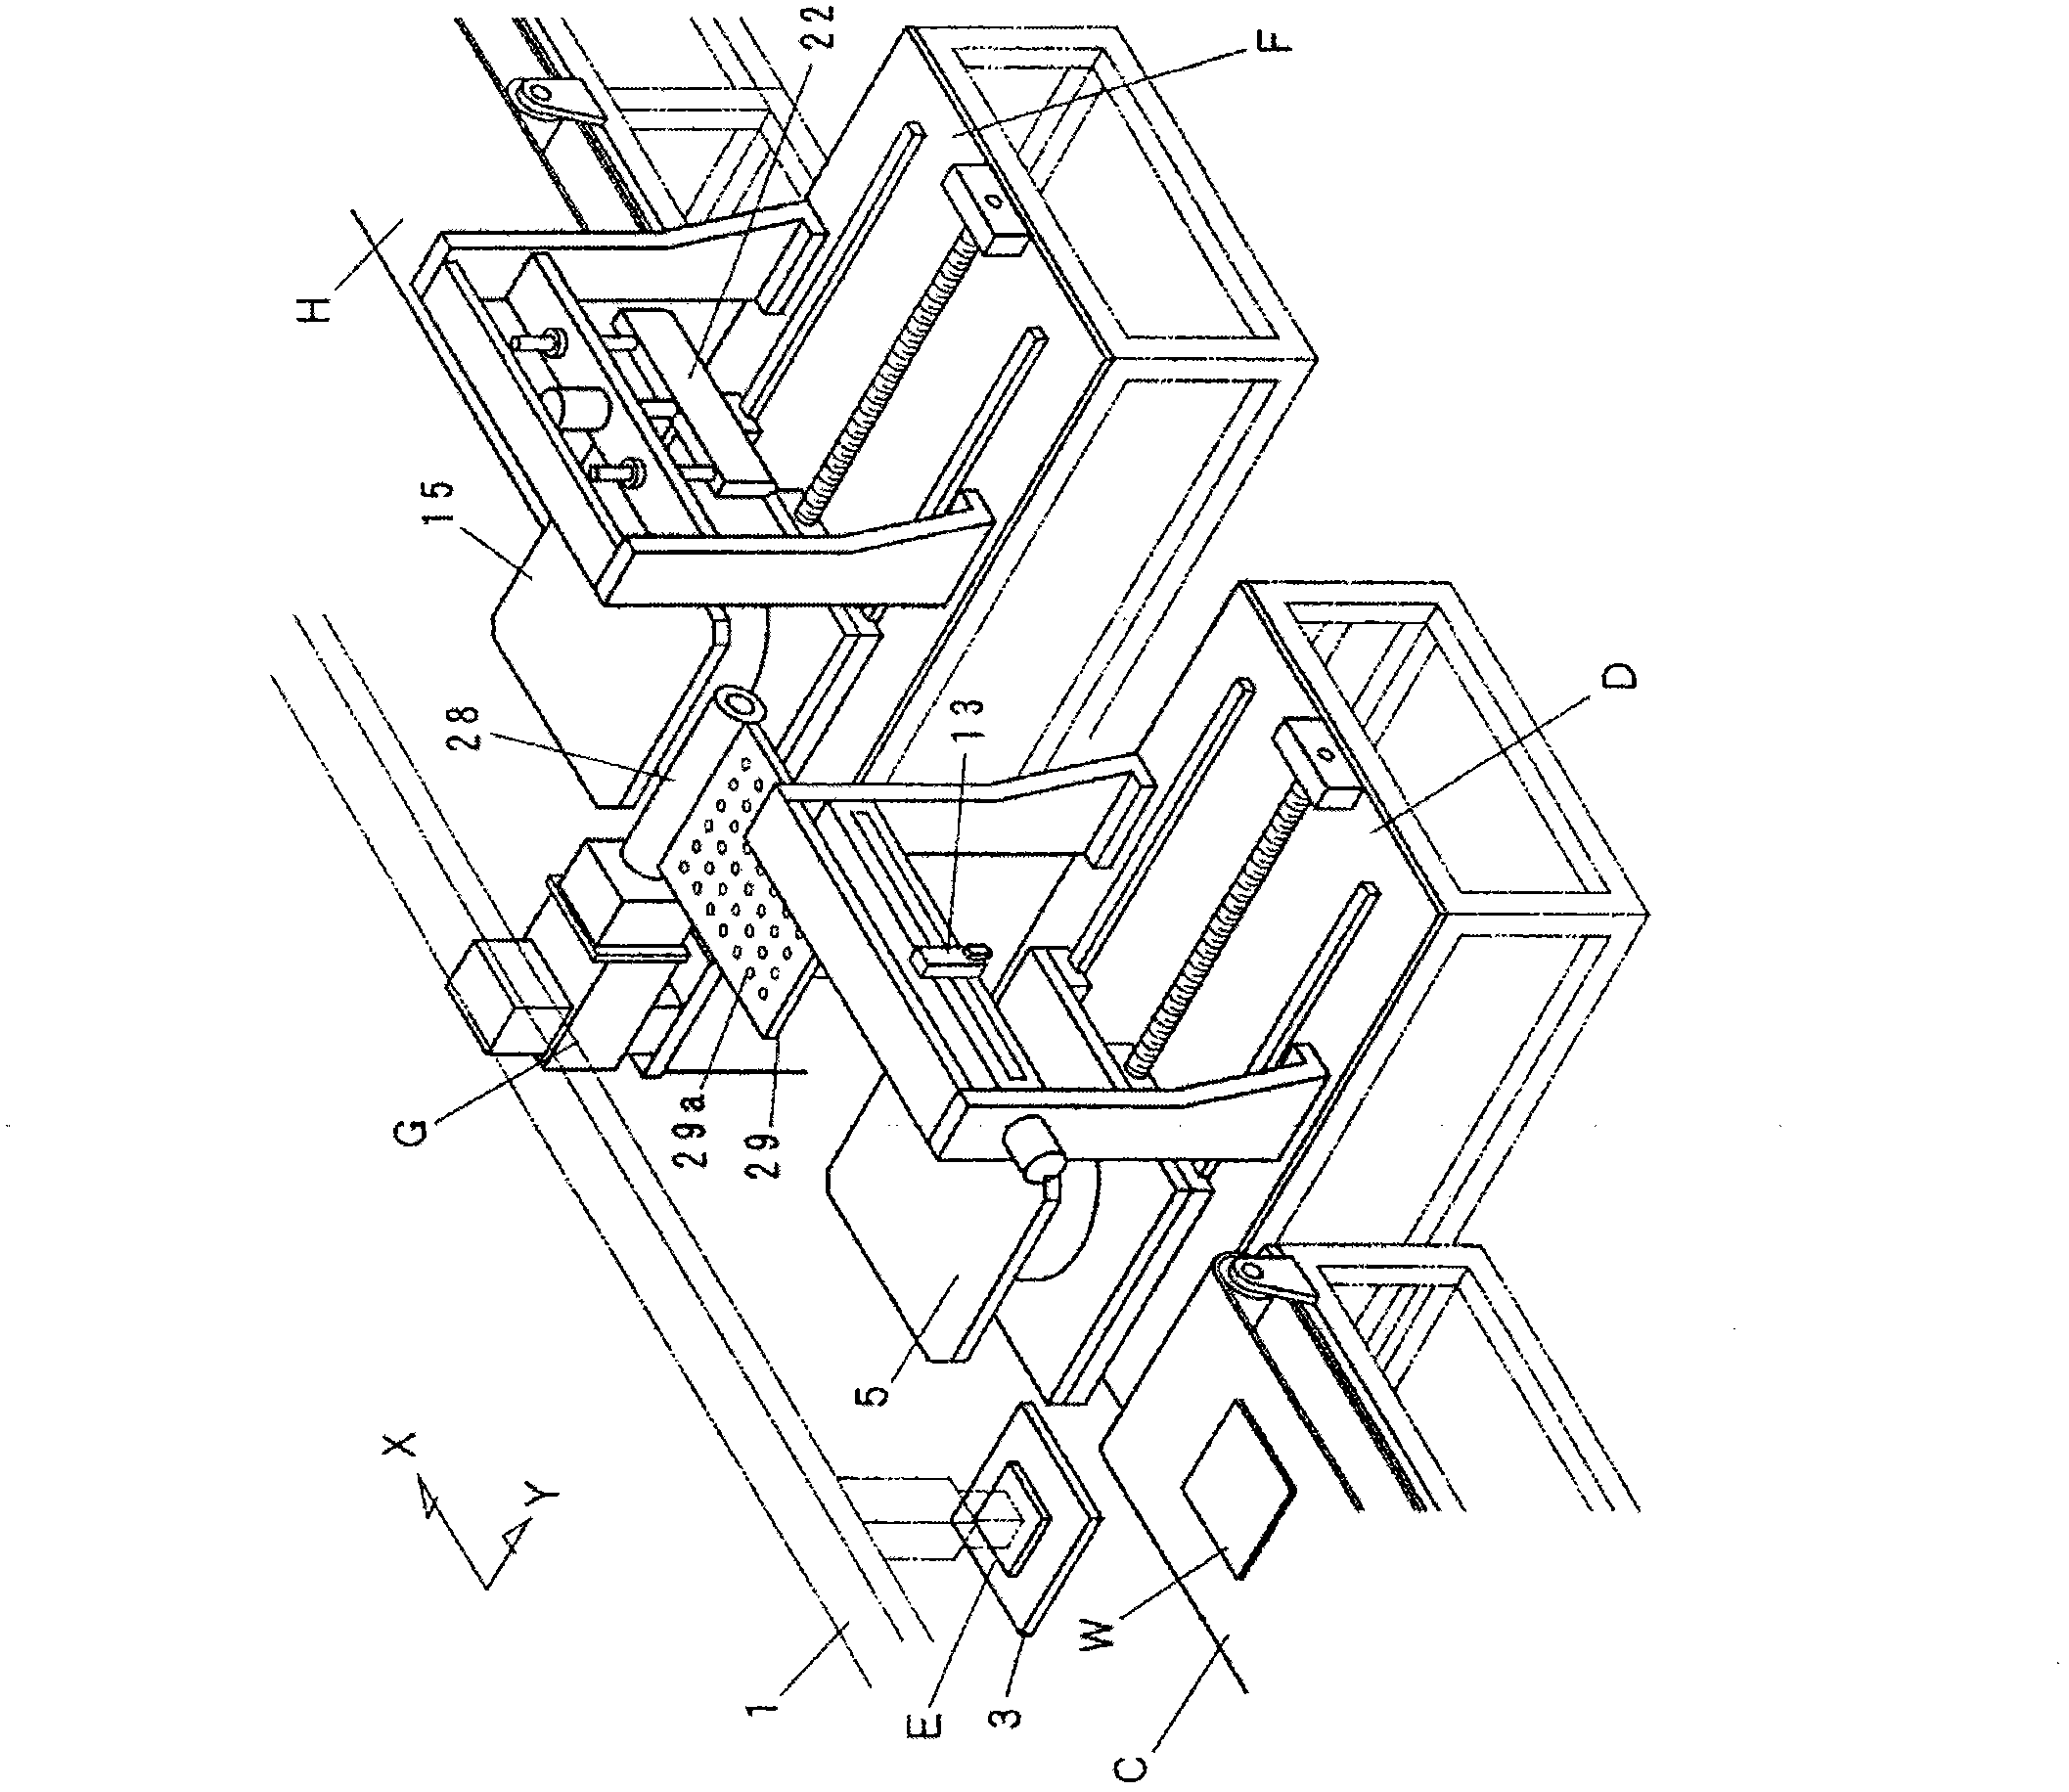 Substrate dividing device